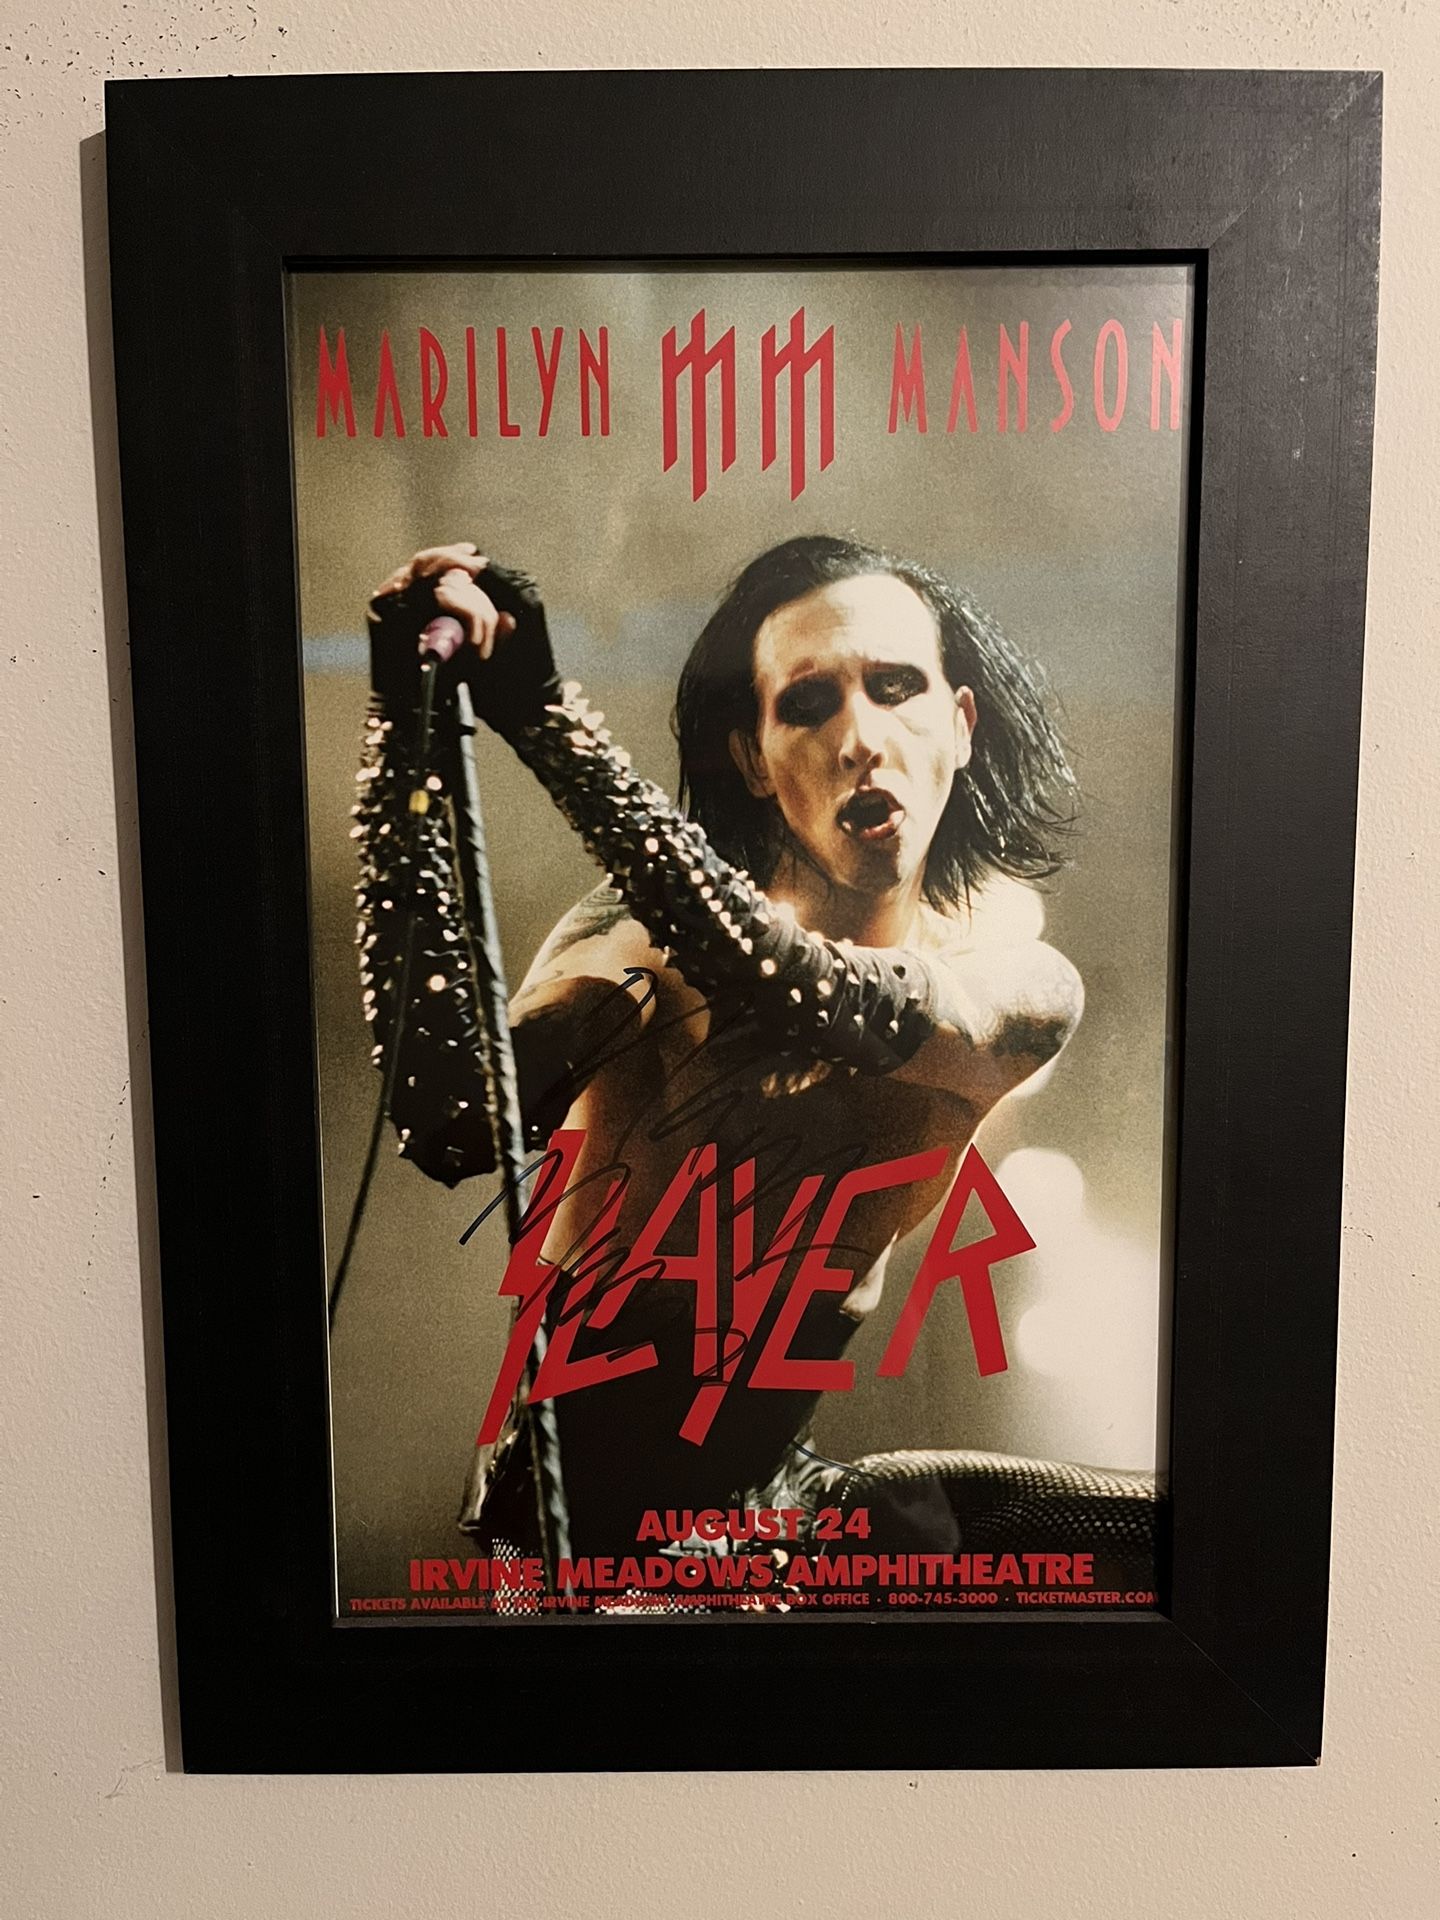 Marilyn Manson Autographed Concert Poster 